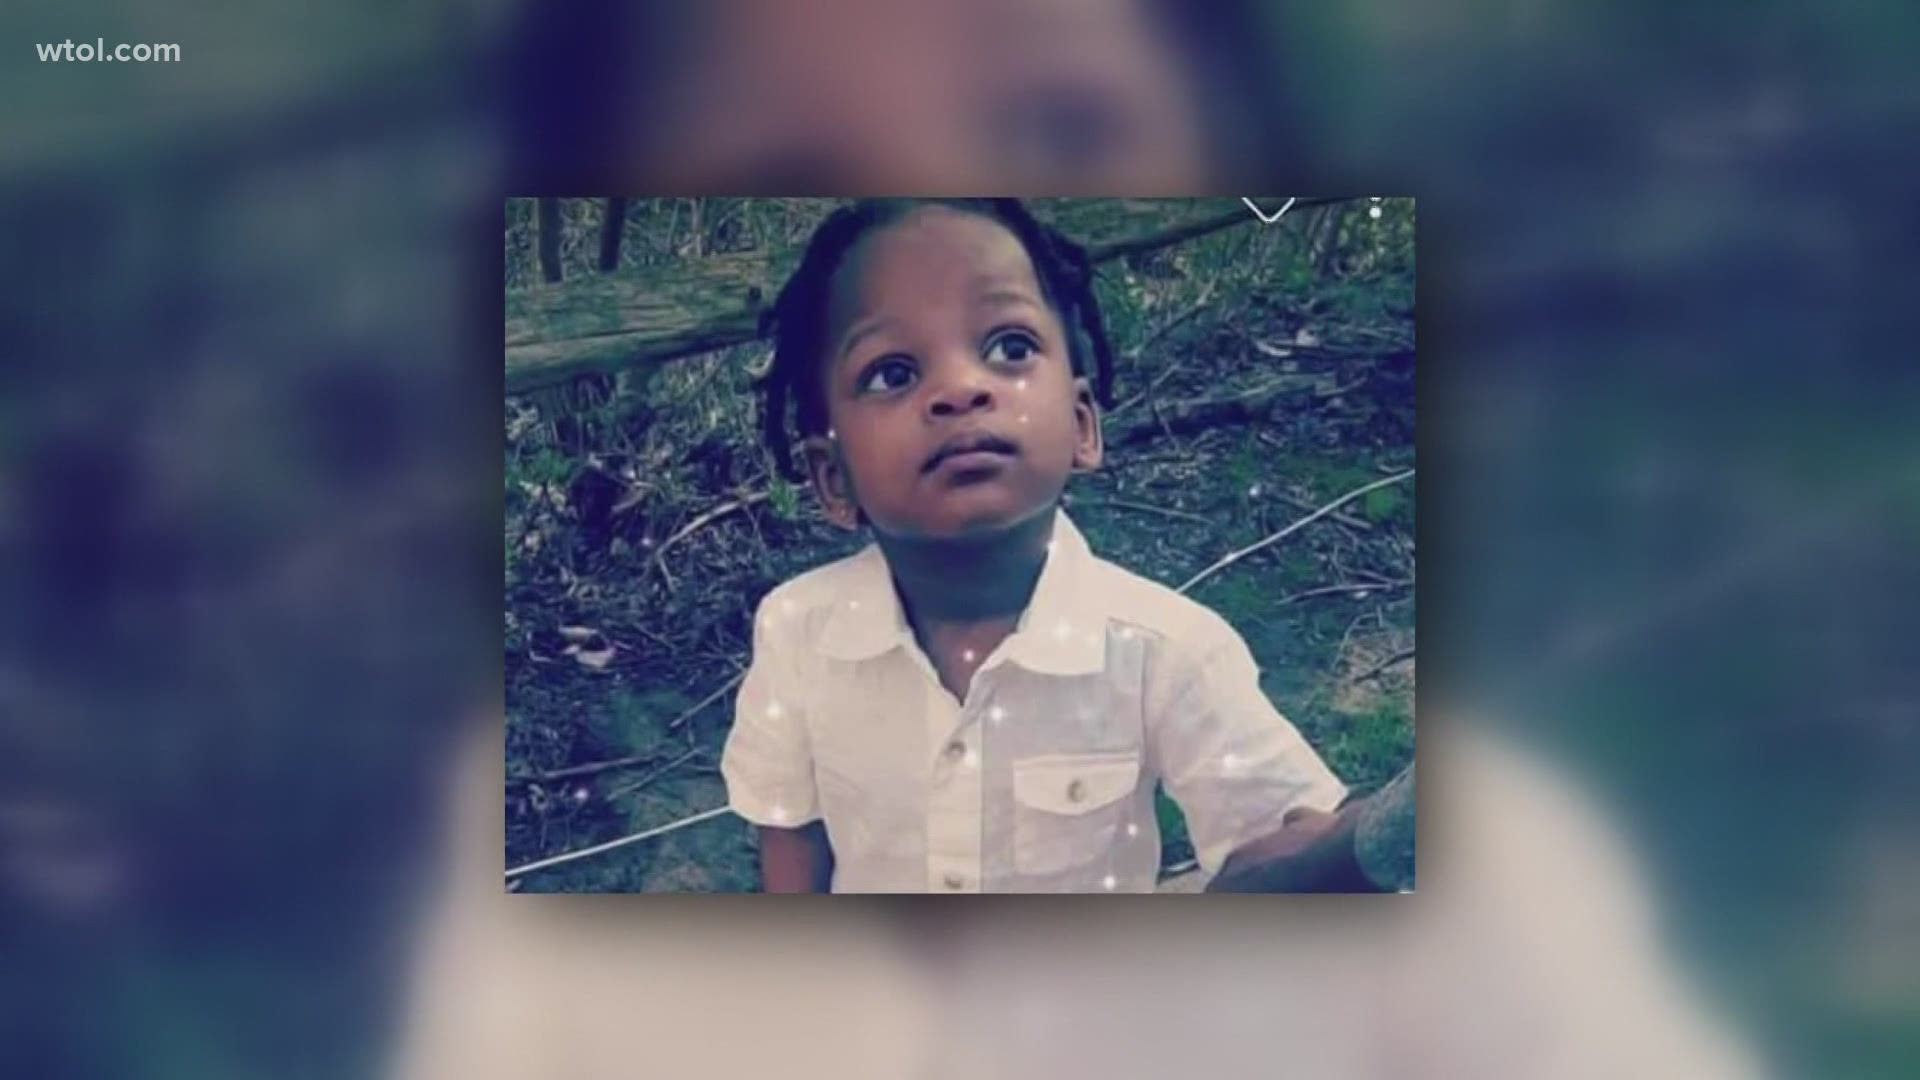 A cause of death has yet to be determined in the death of Braylen Noble. A neighbor recalls hearing Braylen crying often and hopes for calm versus thoughts of anger.